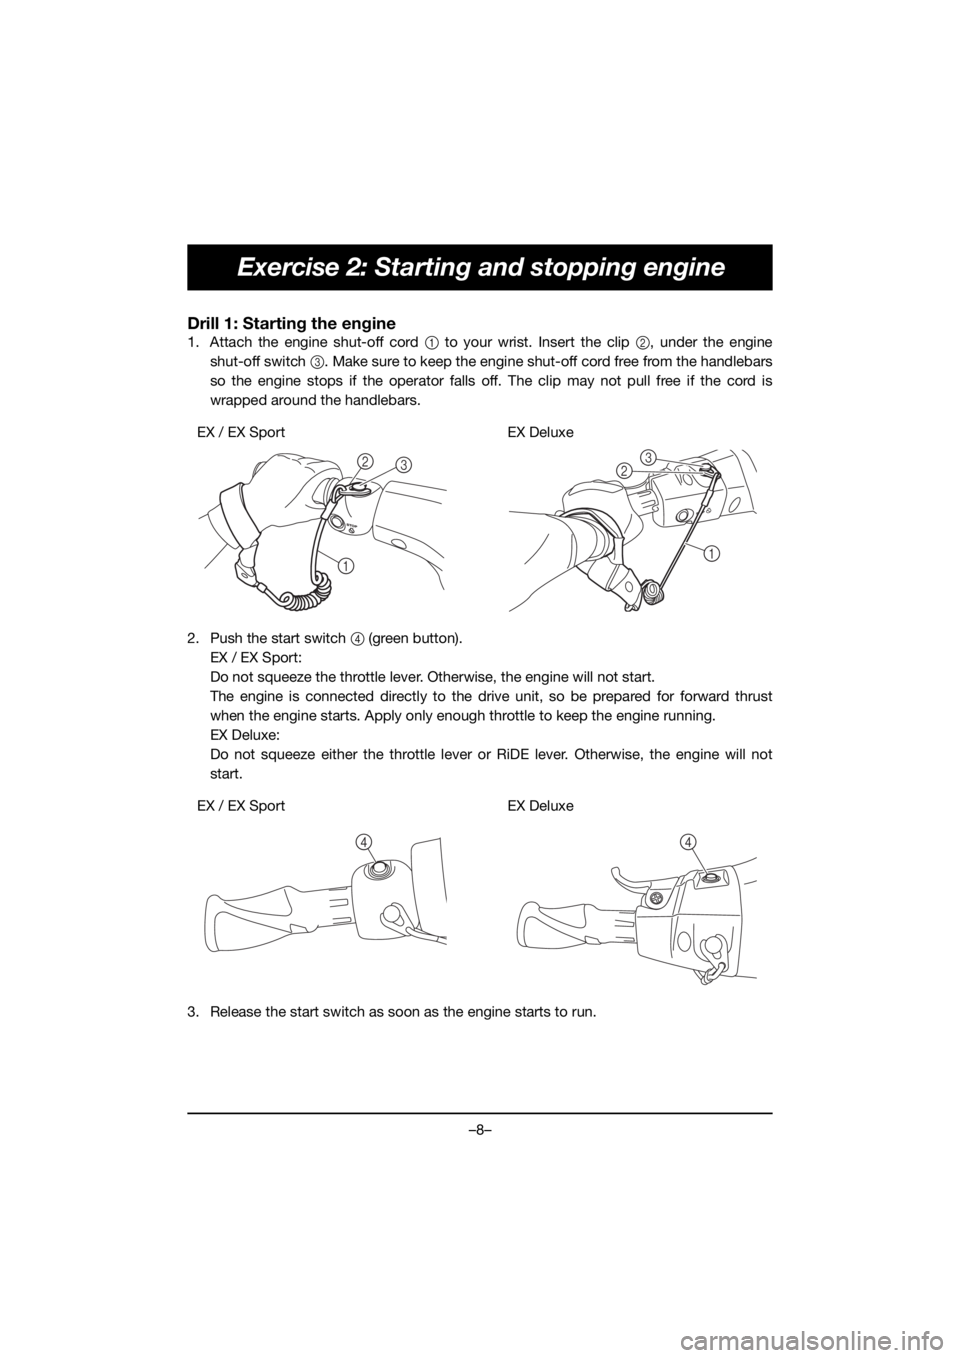 YAMAHA EX 2019  Bruksanvisningar (in Swedish) –8–
Exercise 2: Starting and stopping engine
Drill 1: Starting the engine
1. Attach the engine shut-off cord 1 to your wrist. Insert the clip 2, under the engine
shut-off switch 3. Make sure to ke